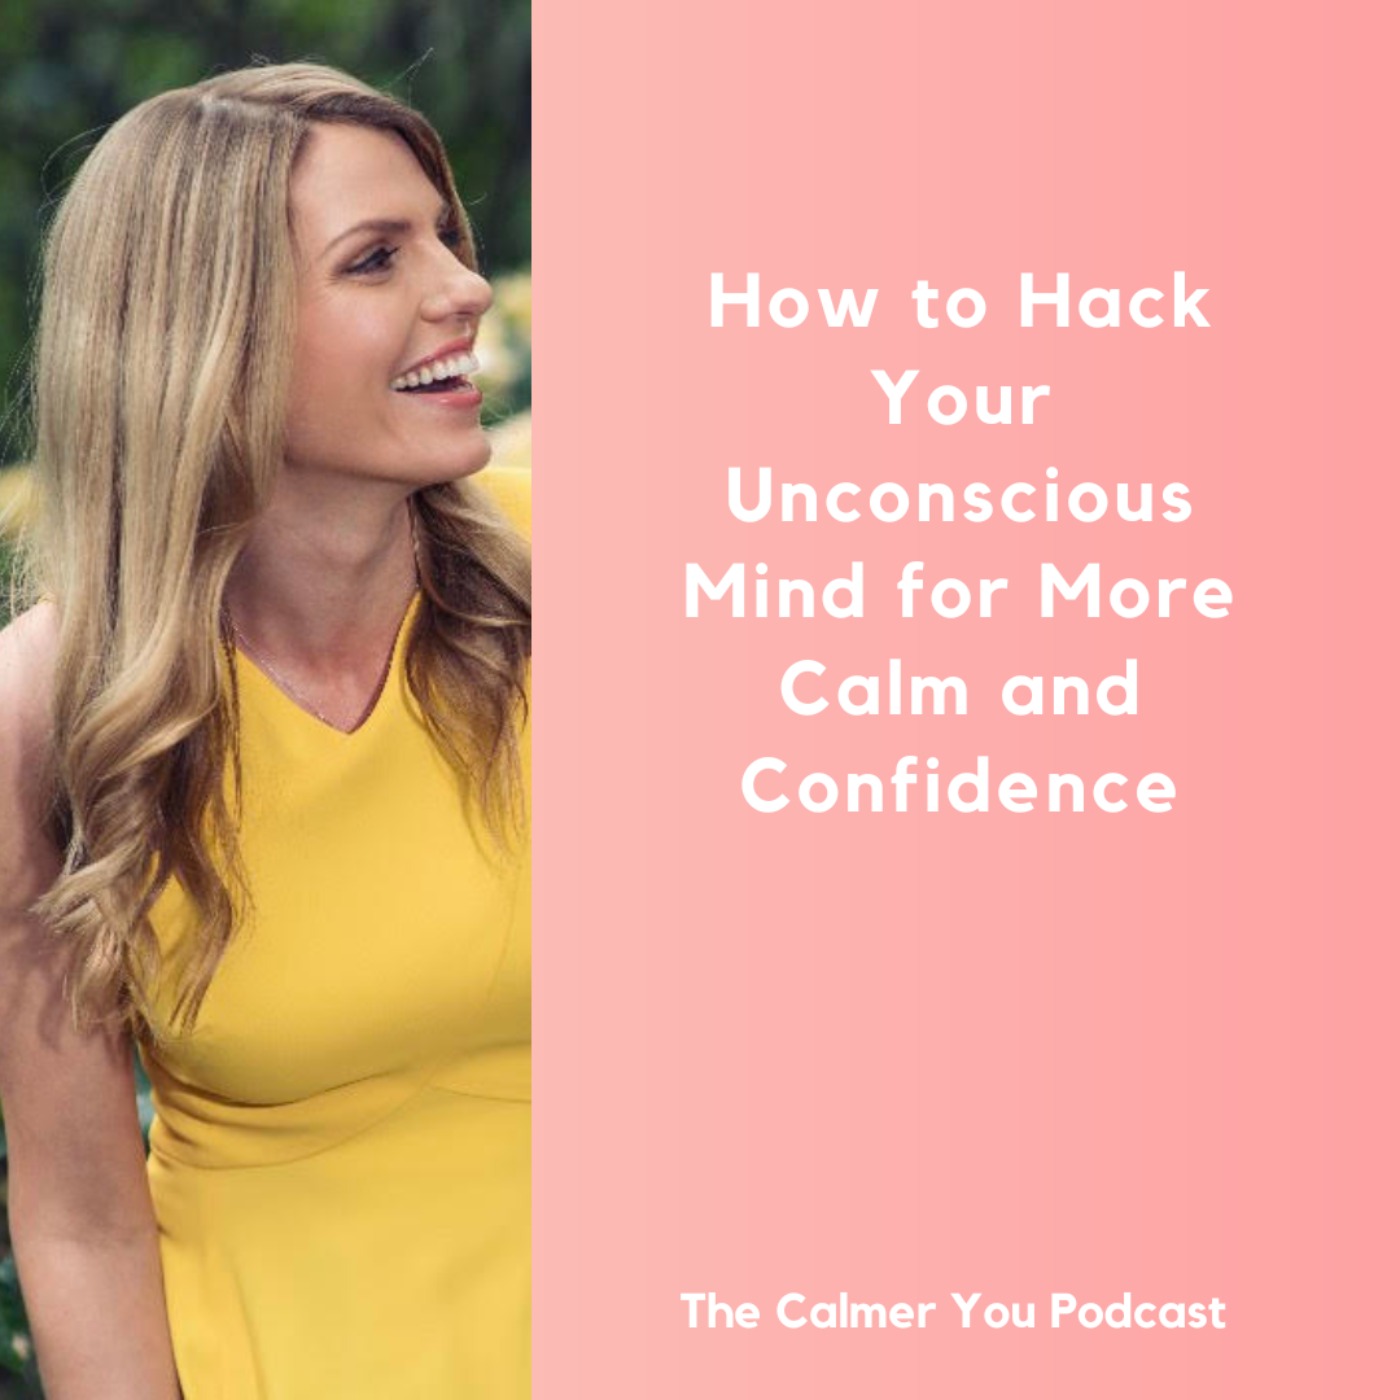 Ep 200. How to Hack Your Unconscious Mind for More Calm and Confidence